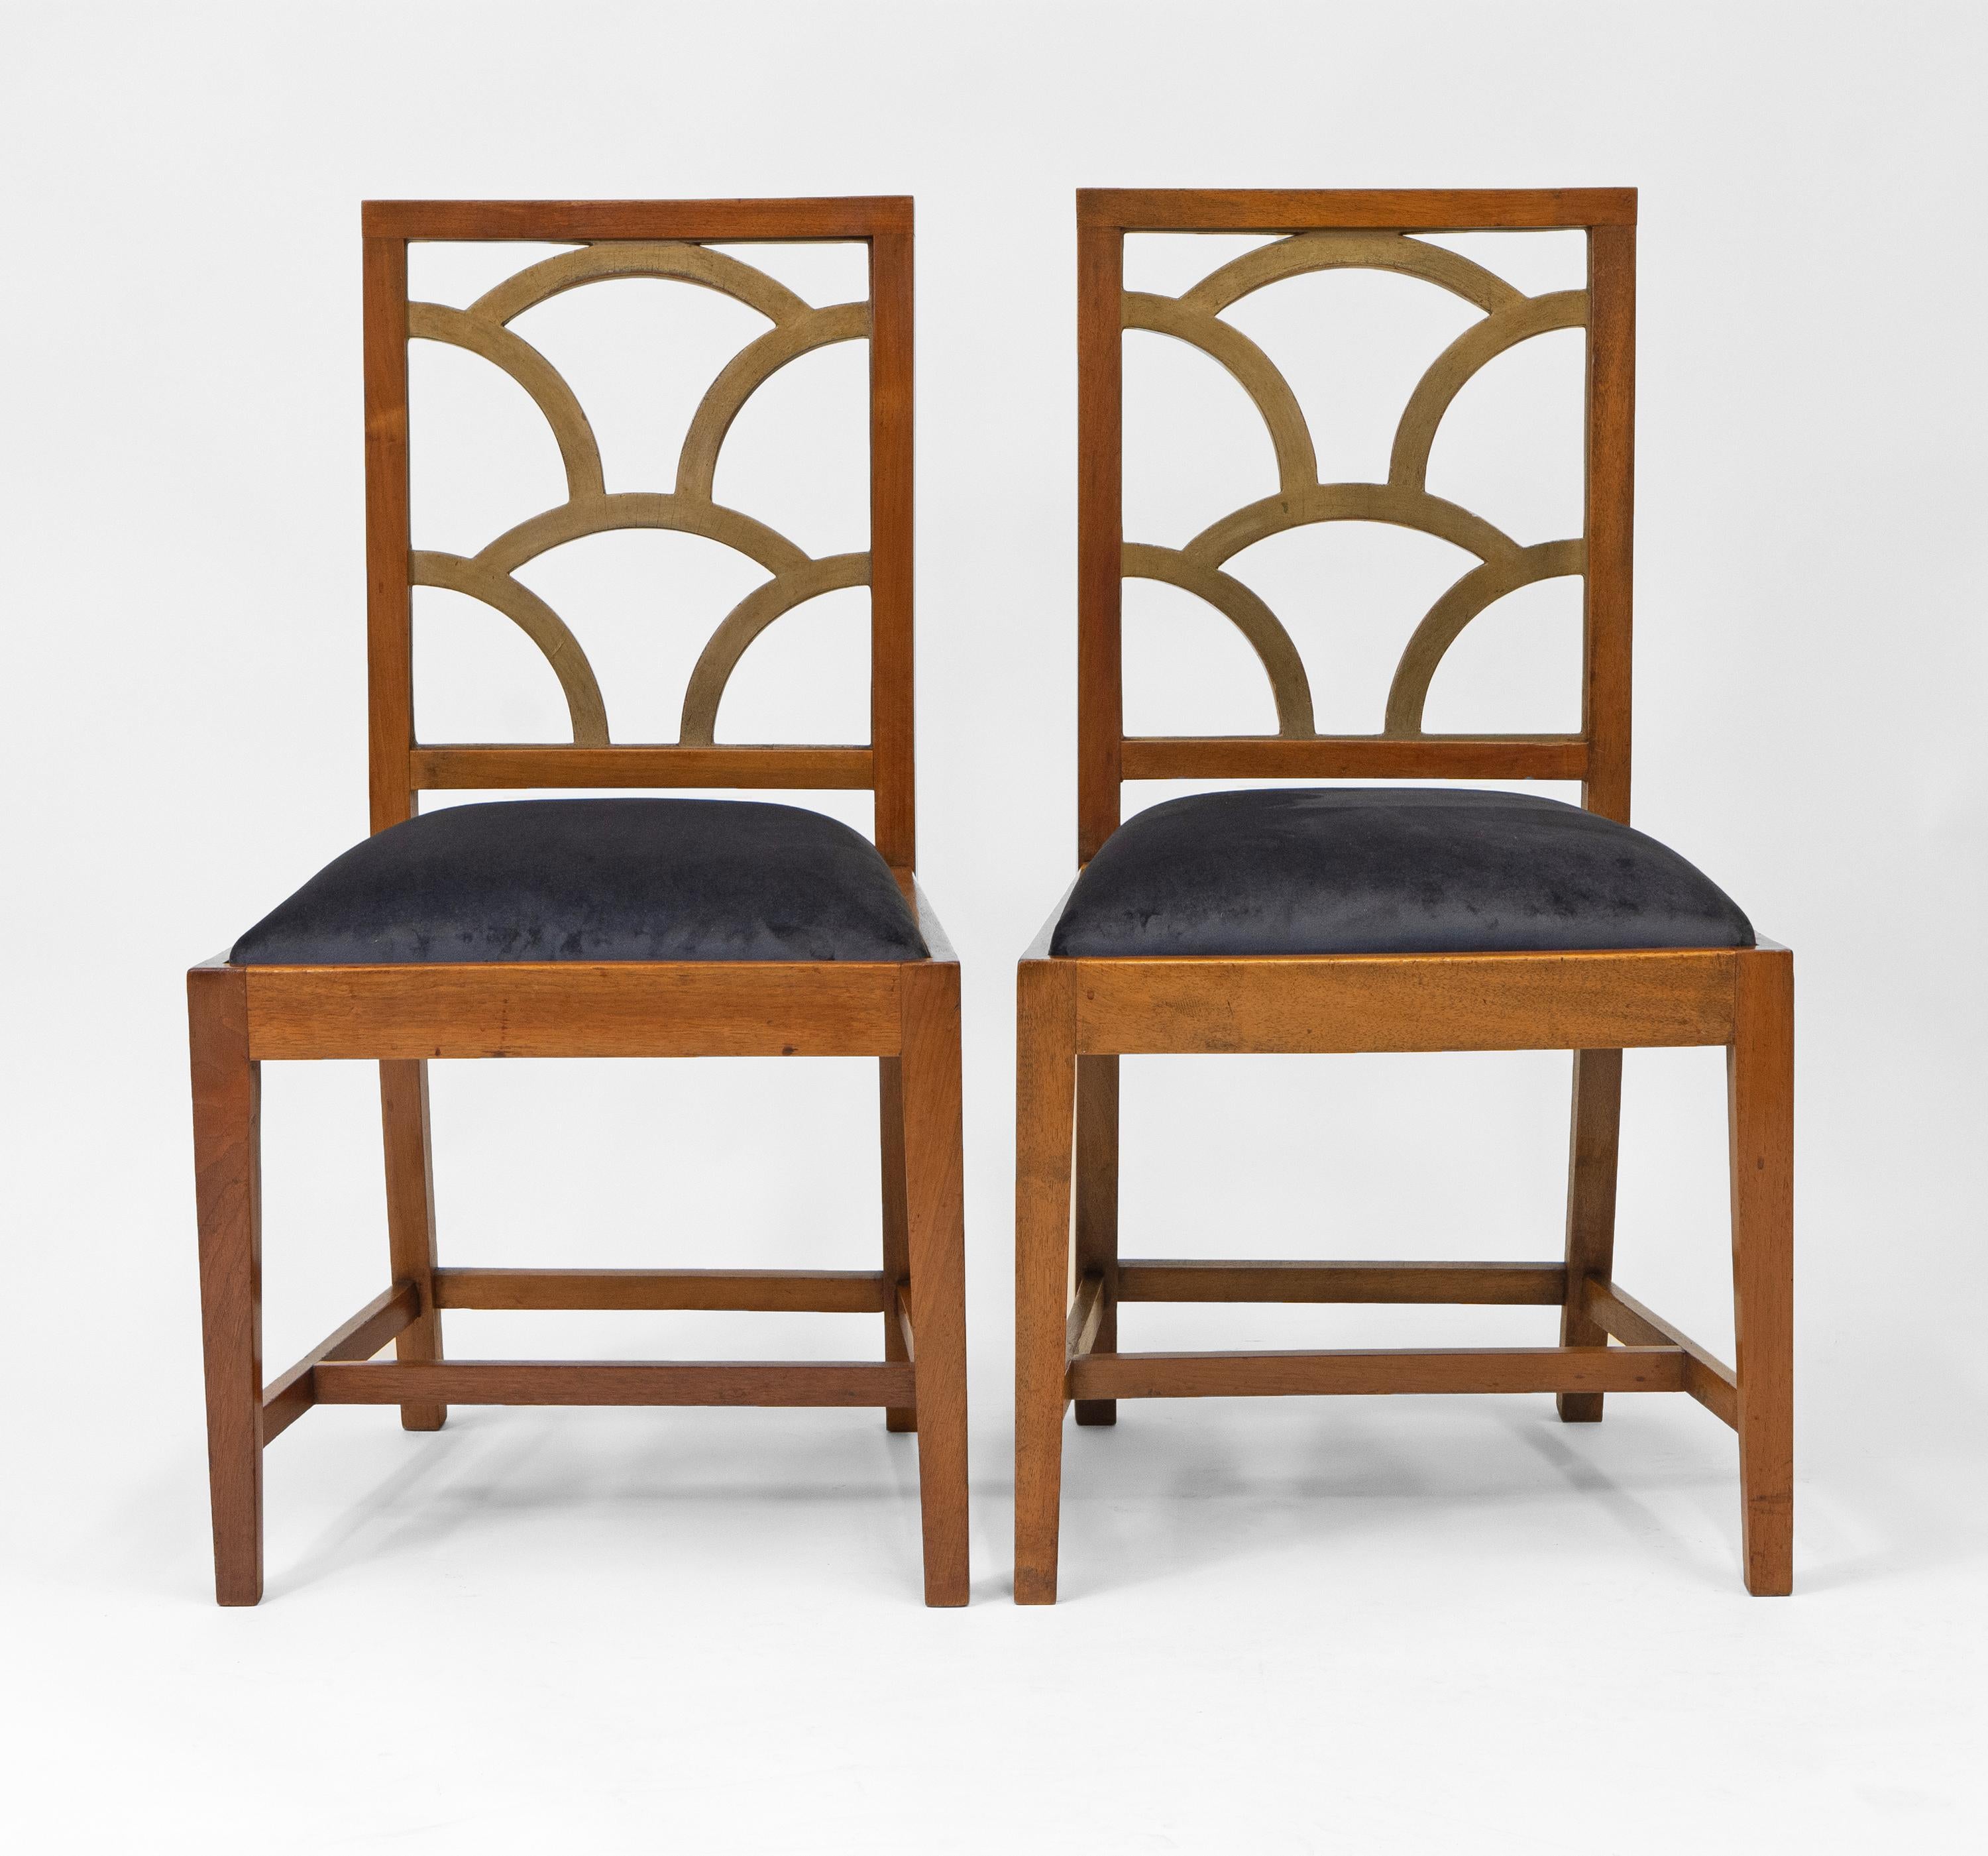 A pair of English Art Deco walnut side chairs with gold finished cloud-form back splats. Made by the Rowley Gallery. Maker's labels: 